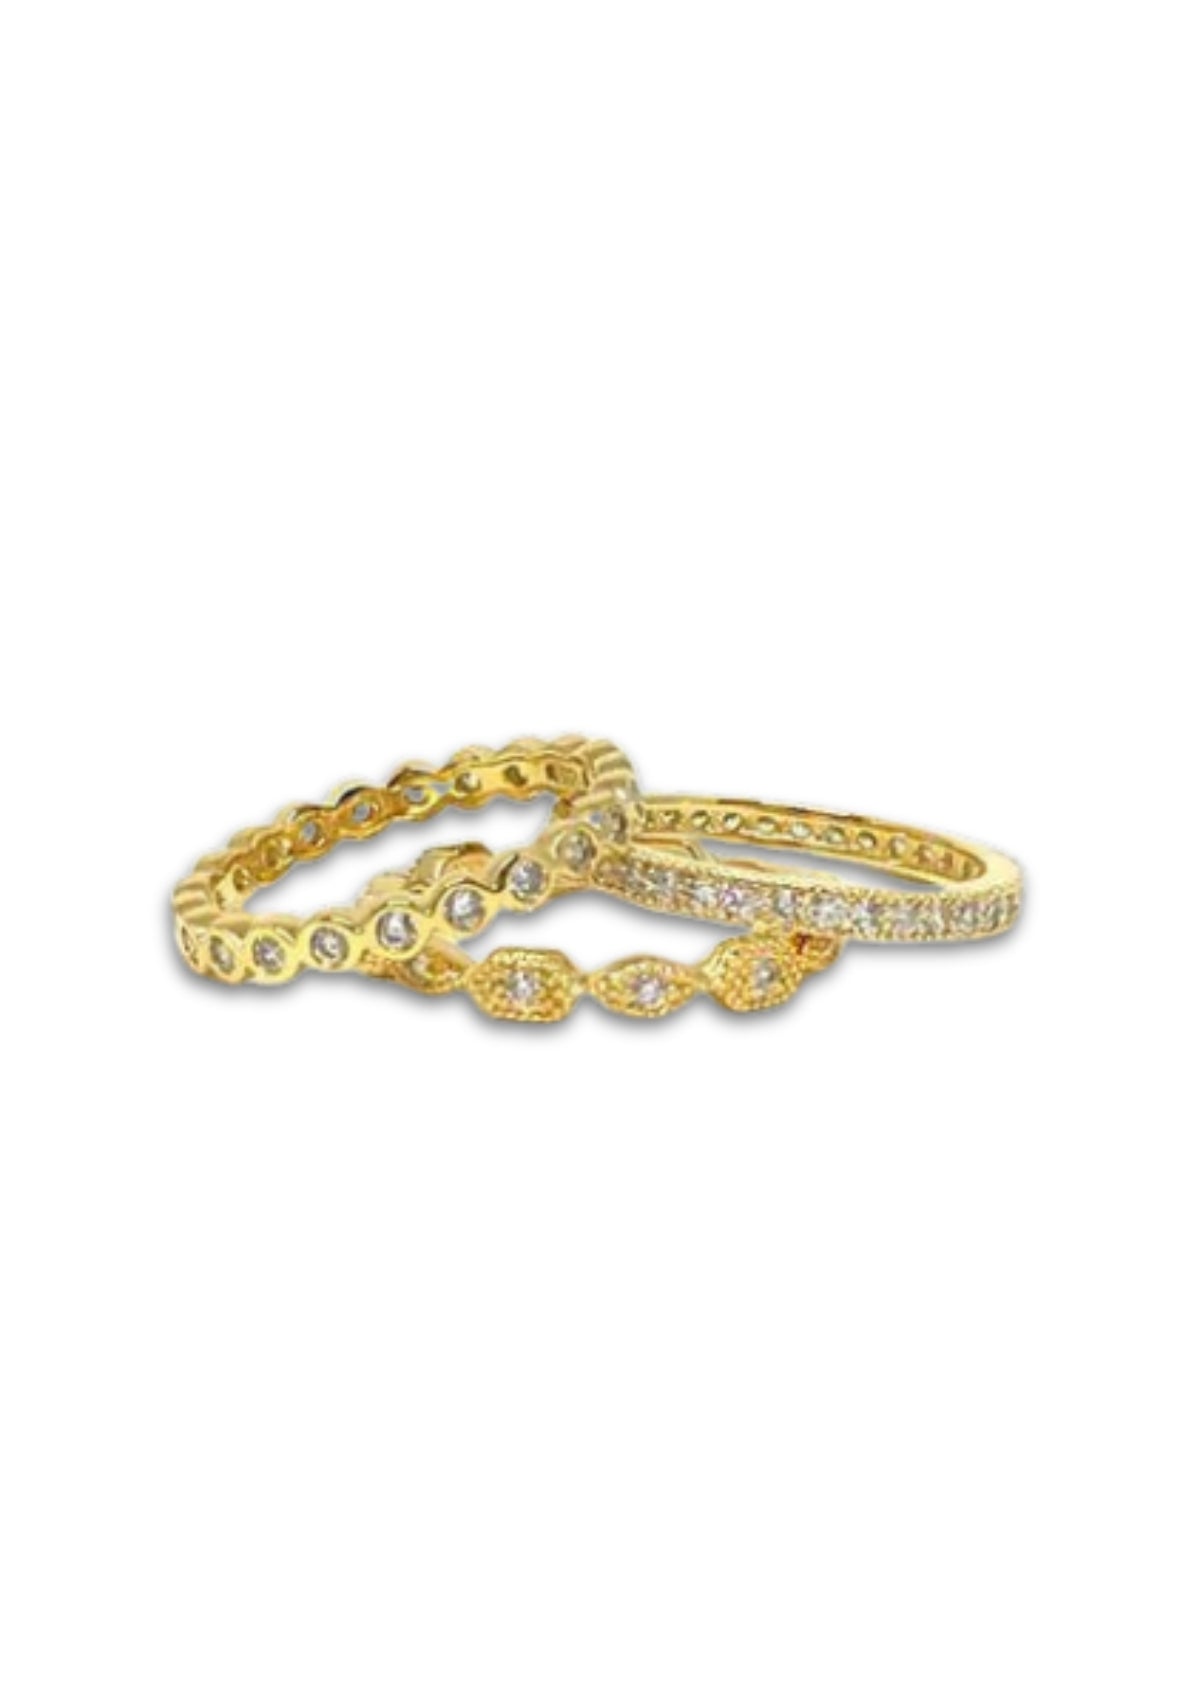 3 Gold rings separate showing cubic zirconia stones.